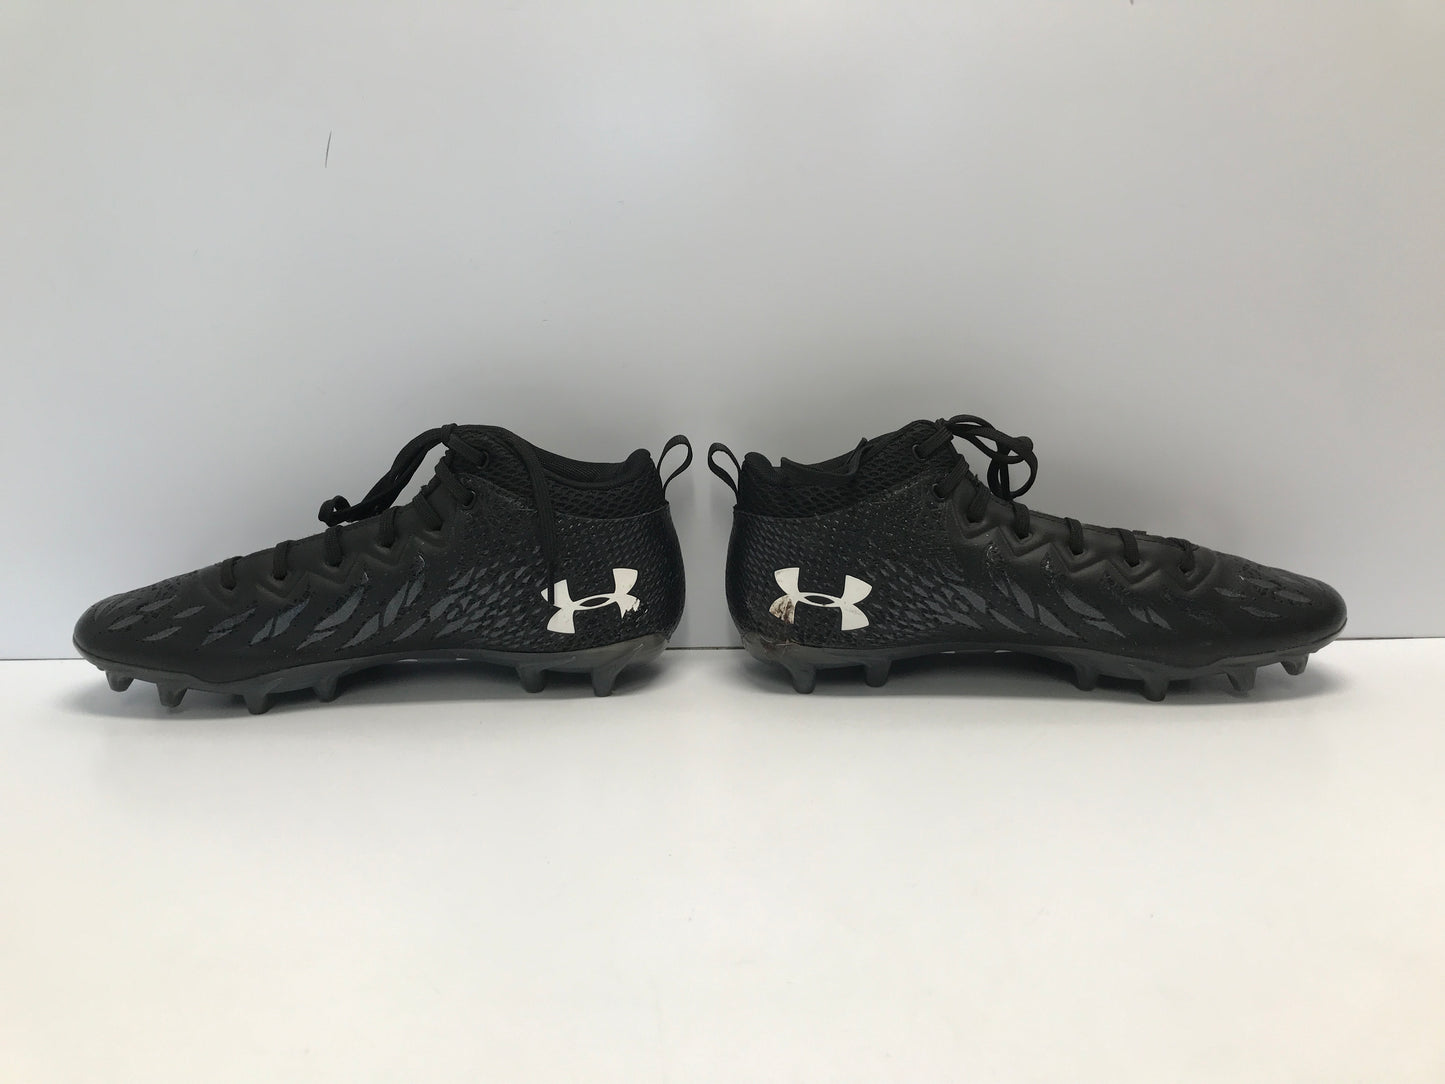 Football Rugby Baseball Soccer Shoes Cleats Men's Size 10 Under Armour Spot Light Black Like New